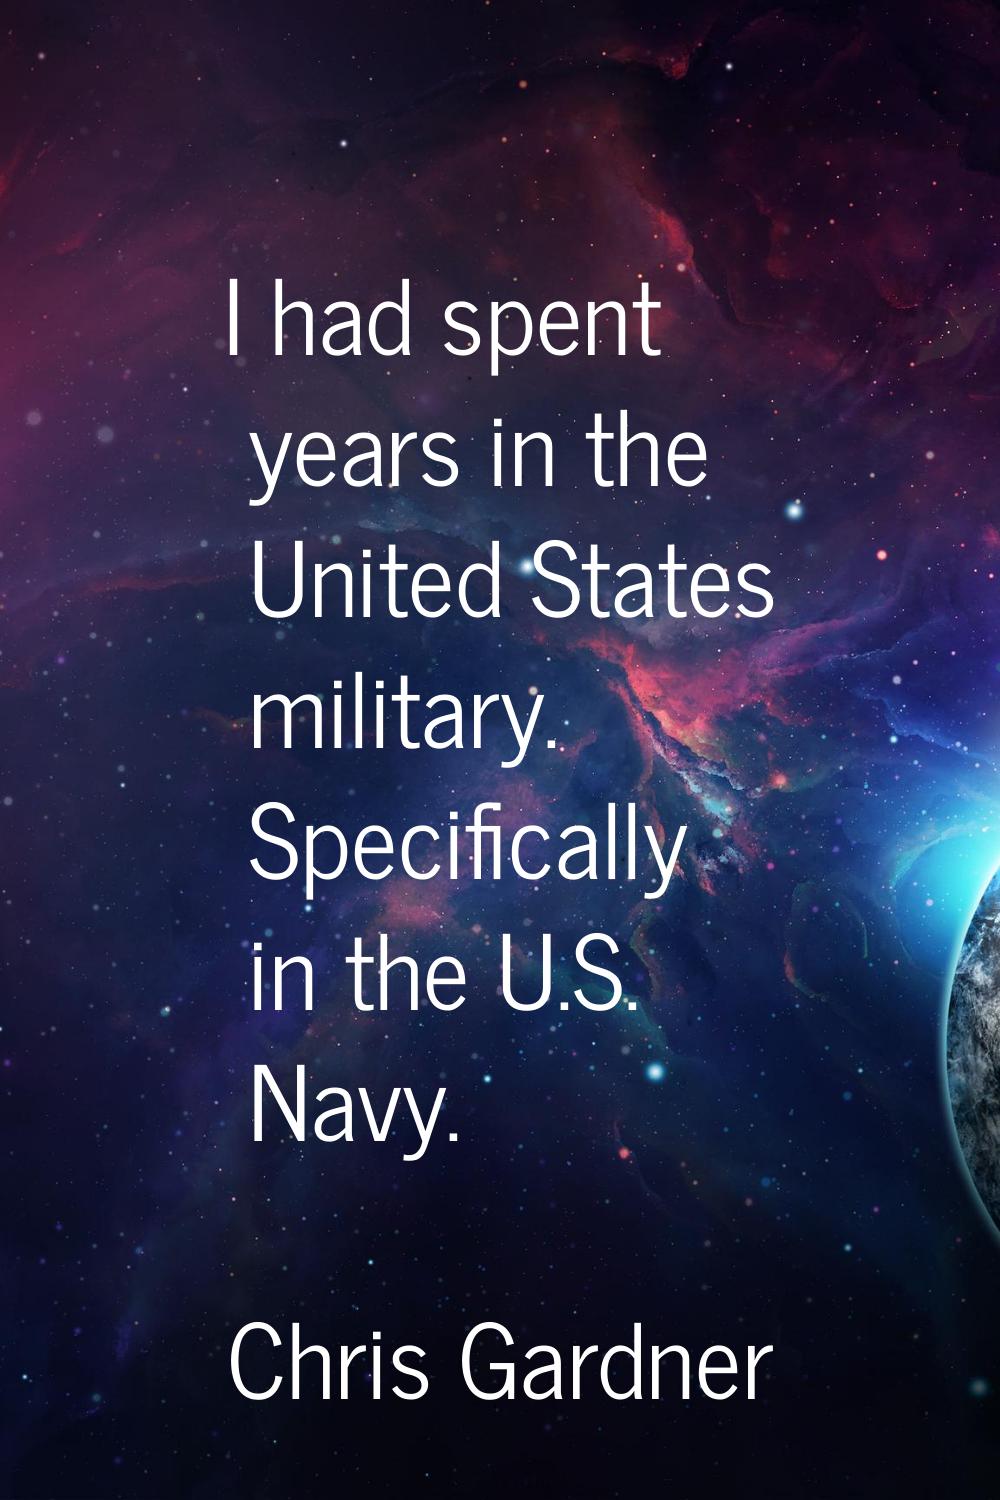 I had spent years in the United States military. Specifically in the U.S. Navy.